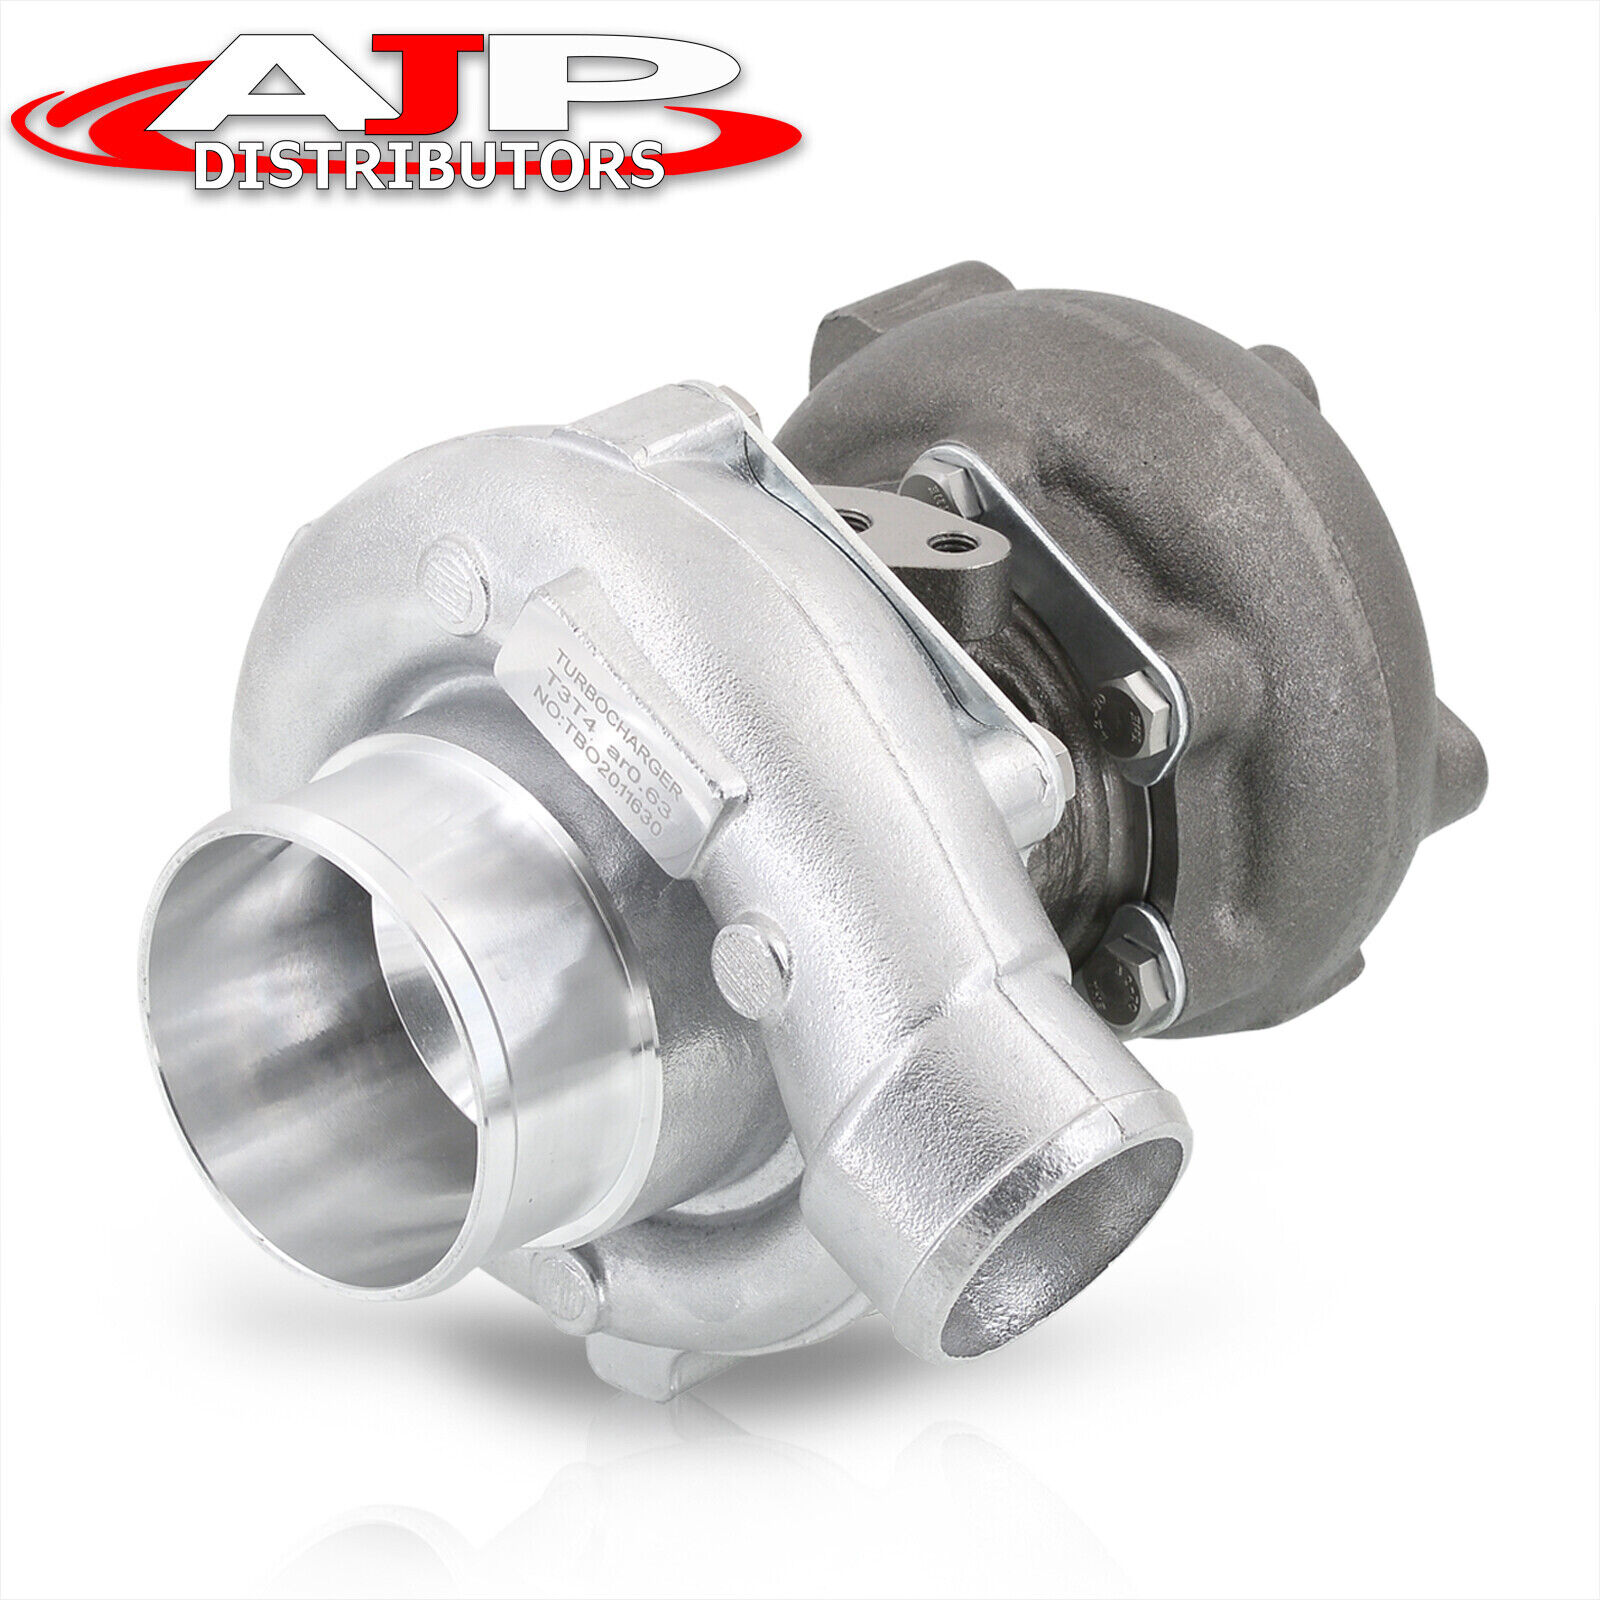 T3/T4 .63AR Hybrid T04B Turbo Charger Performance Upgrade Universal Turbocharger